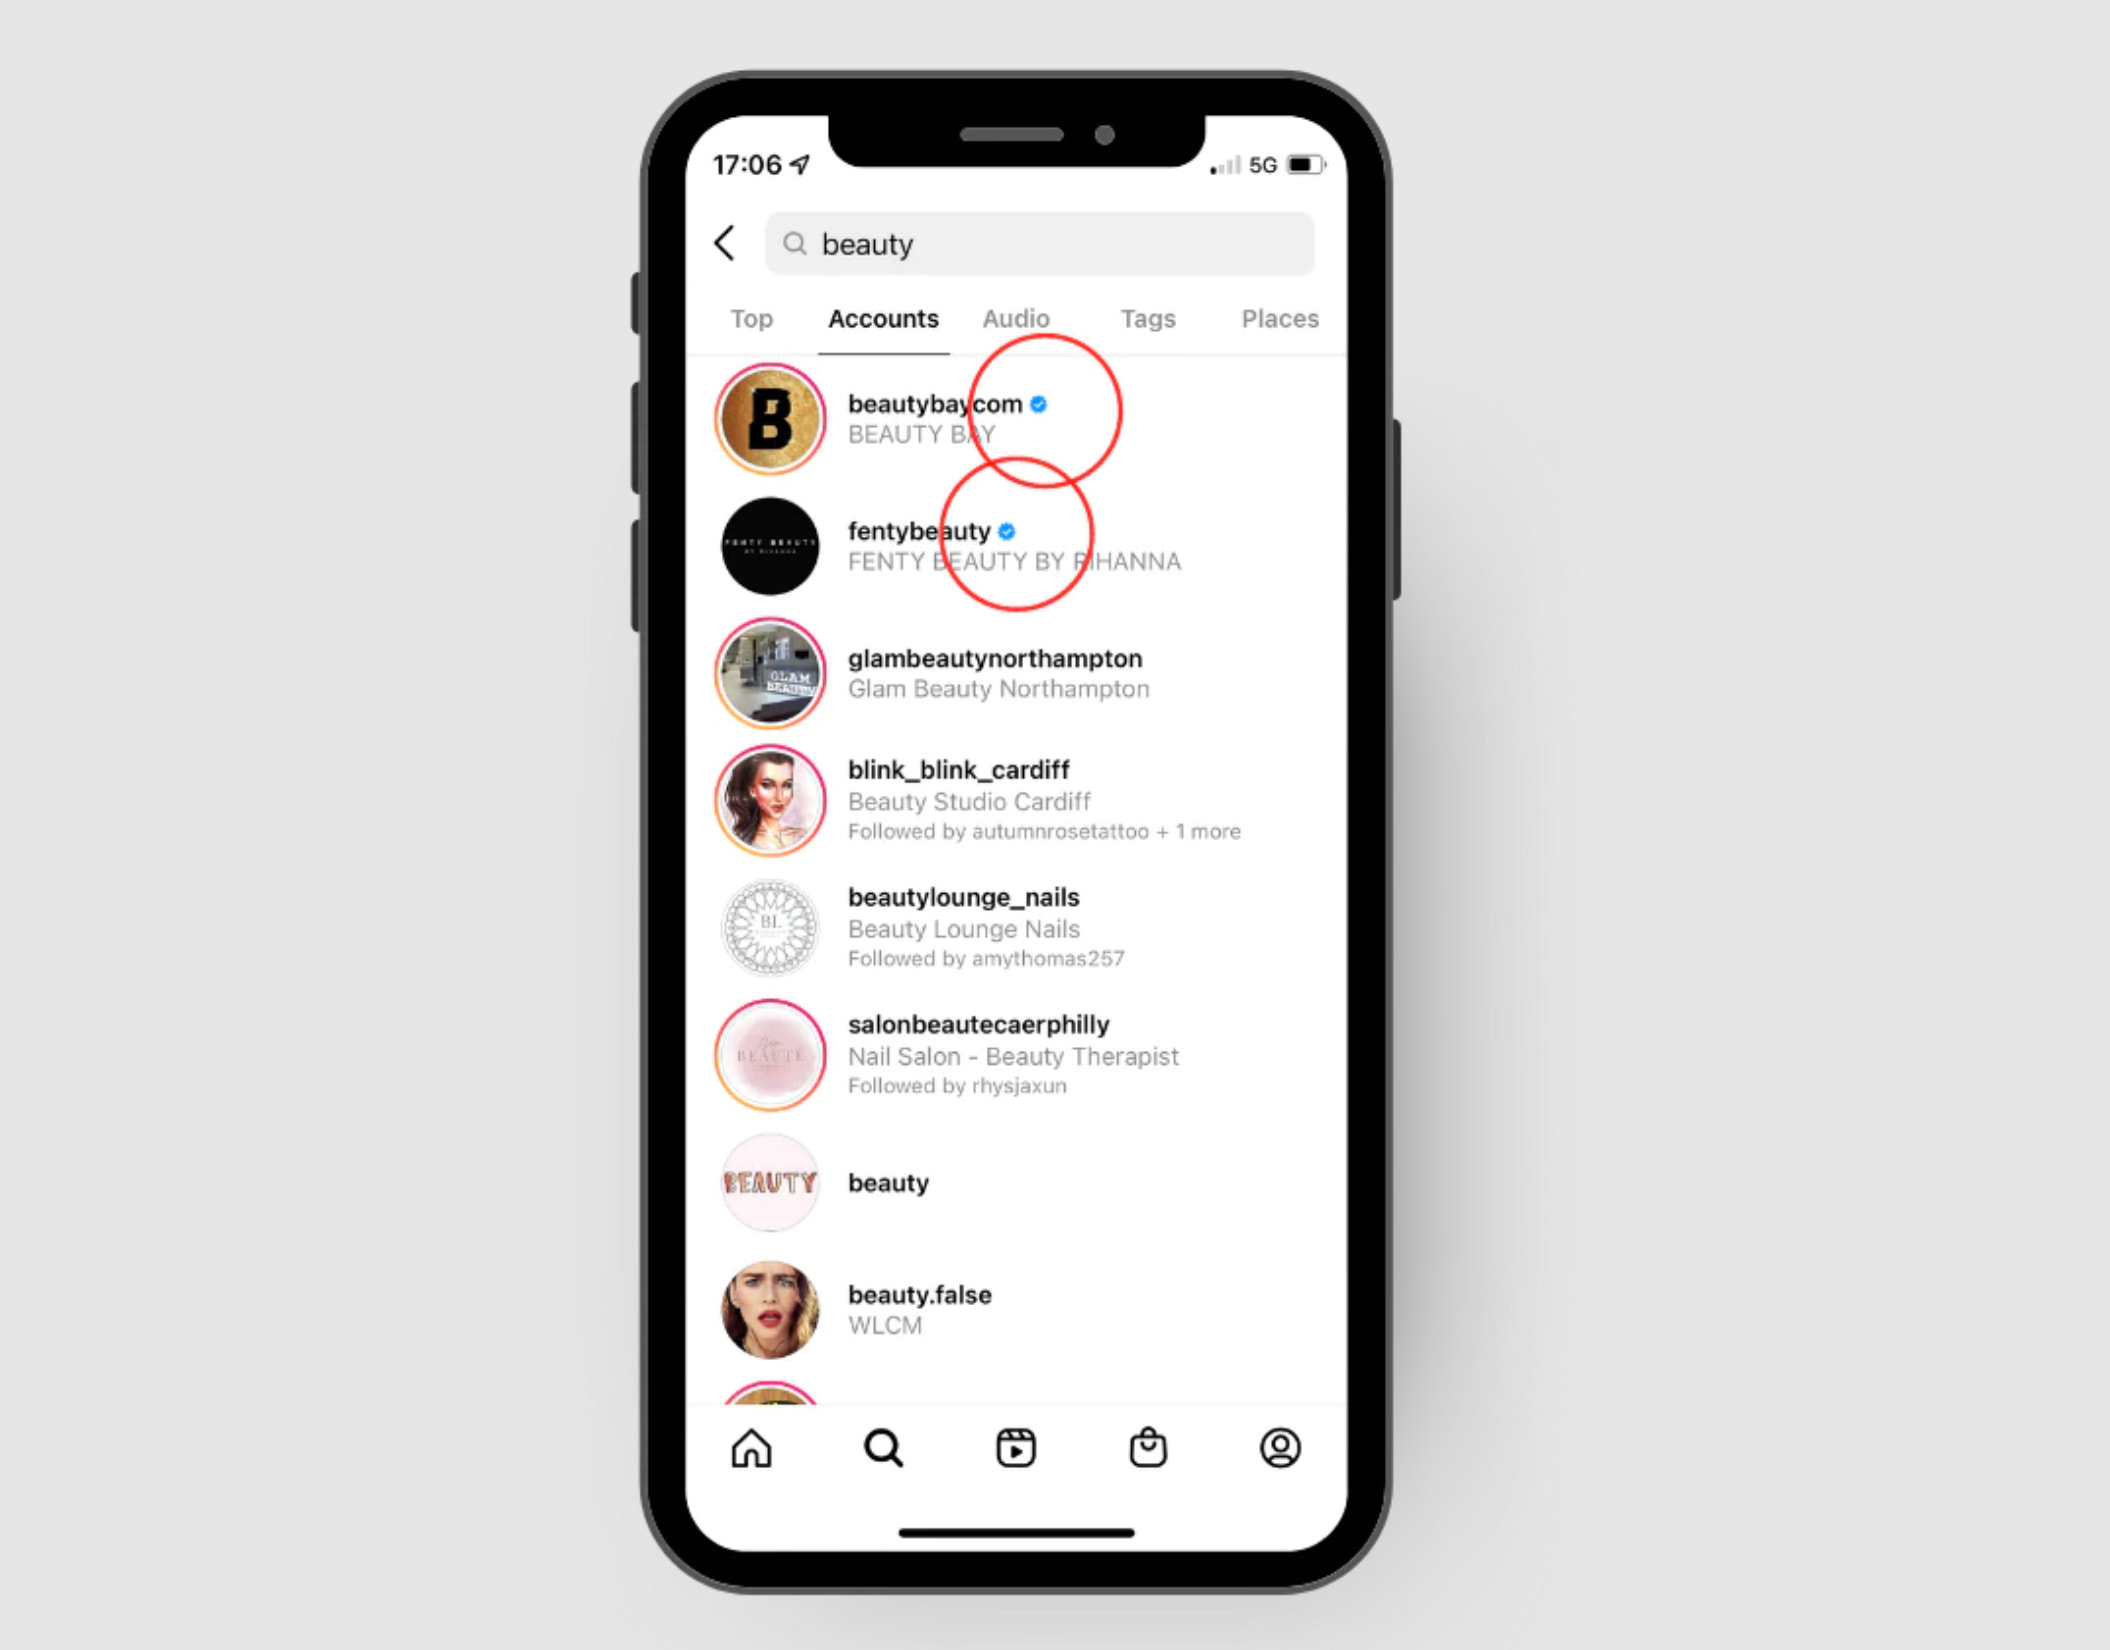 HOW TO GET VERIFIED ON INSTAGRAM IN 2024 